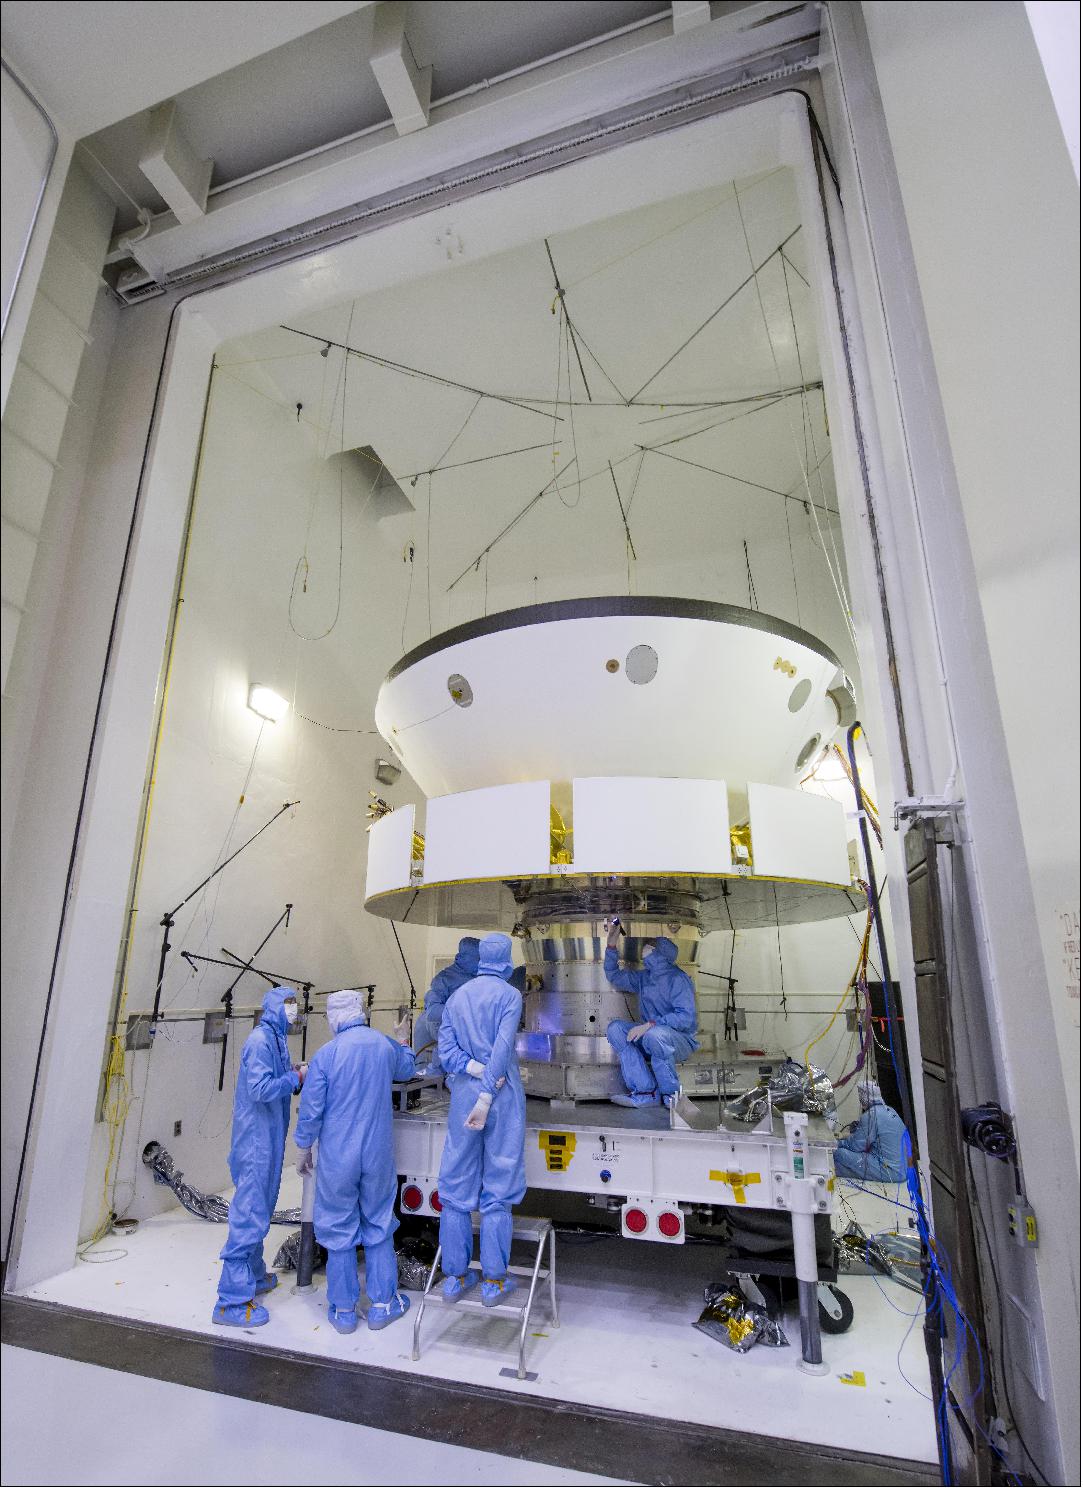 Figure 13: Engineers and technicians working on NASA's Mars 2020 mission prepare spacecraft components for acoustic testing in the Environmental Test Facility at NASA's Jet Propulsion Laboratory in Pasadena, California. The spacecraft is being tested in the same configuration it will be in when sitting atop the Atlas rocket that will launch the latest rover towards Mars in July 2020. The image was taken on April 11, 2019, at NASA/JPL (image credit: NASA/JPL)